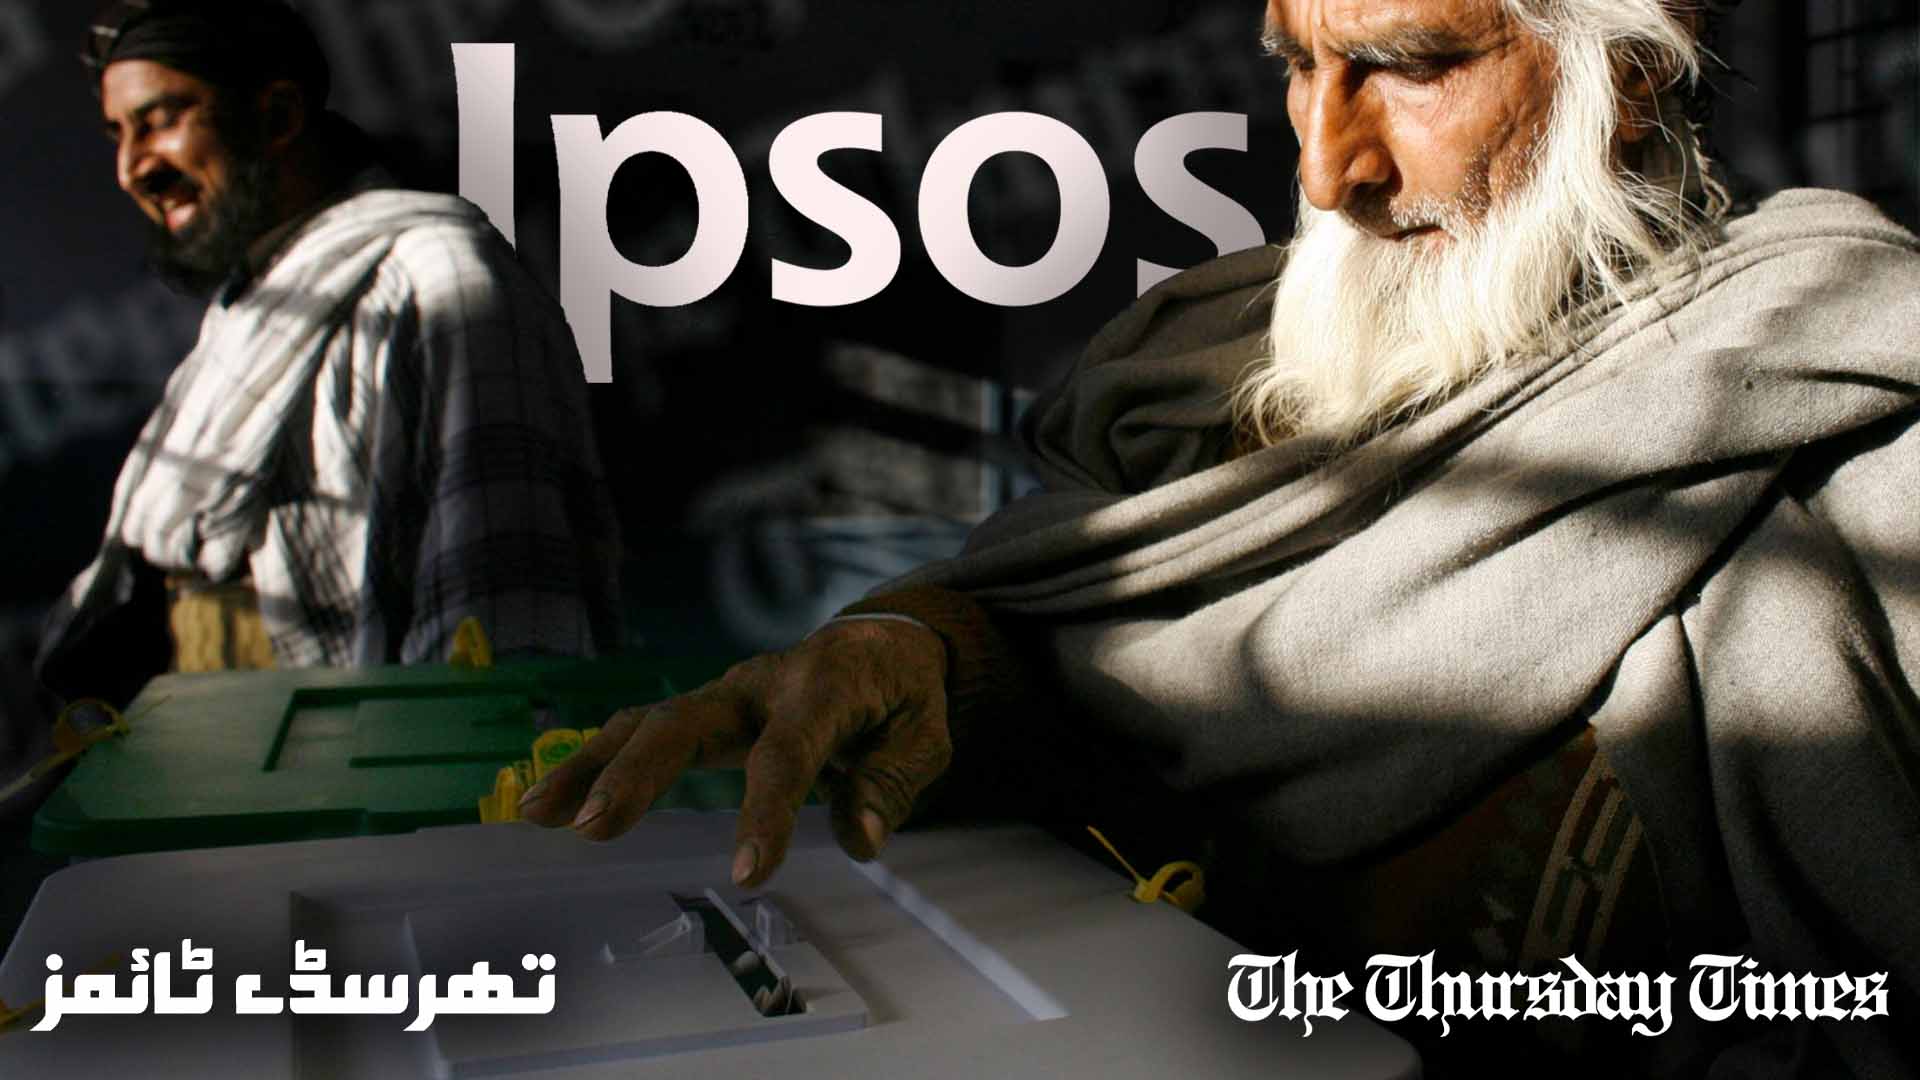 A voter casts his ballot at Peshawar. — FILE/THE THURSDAY TIMES